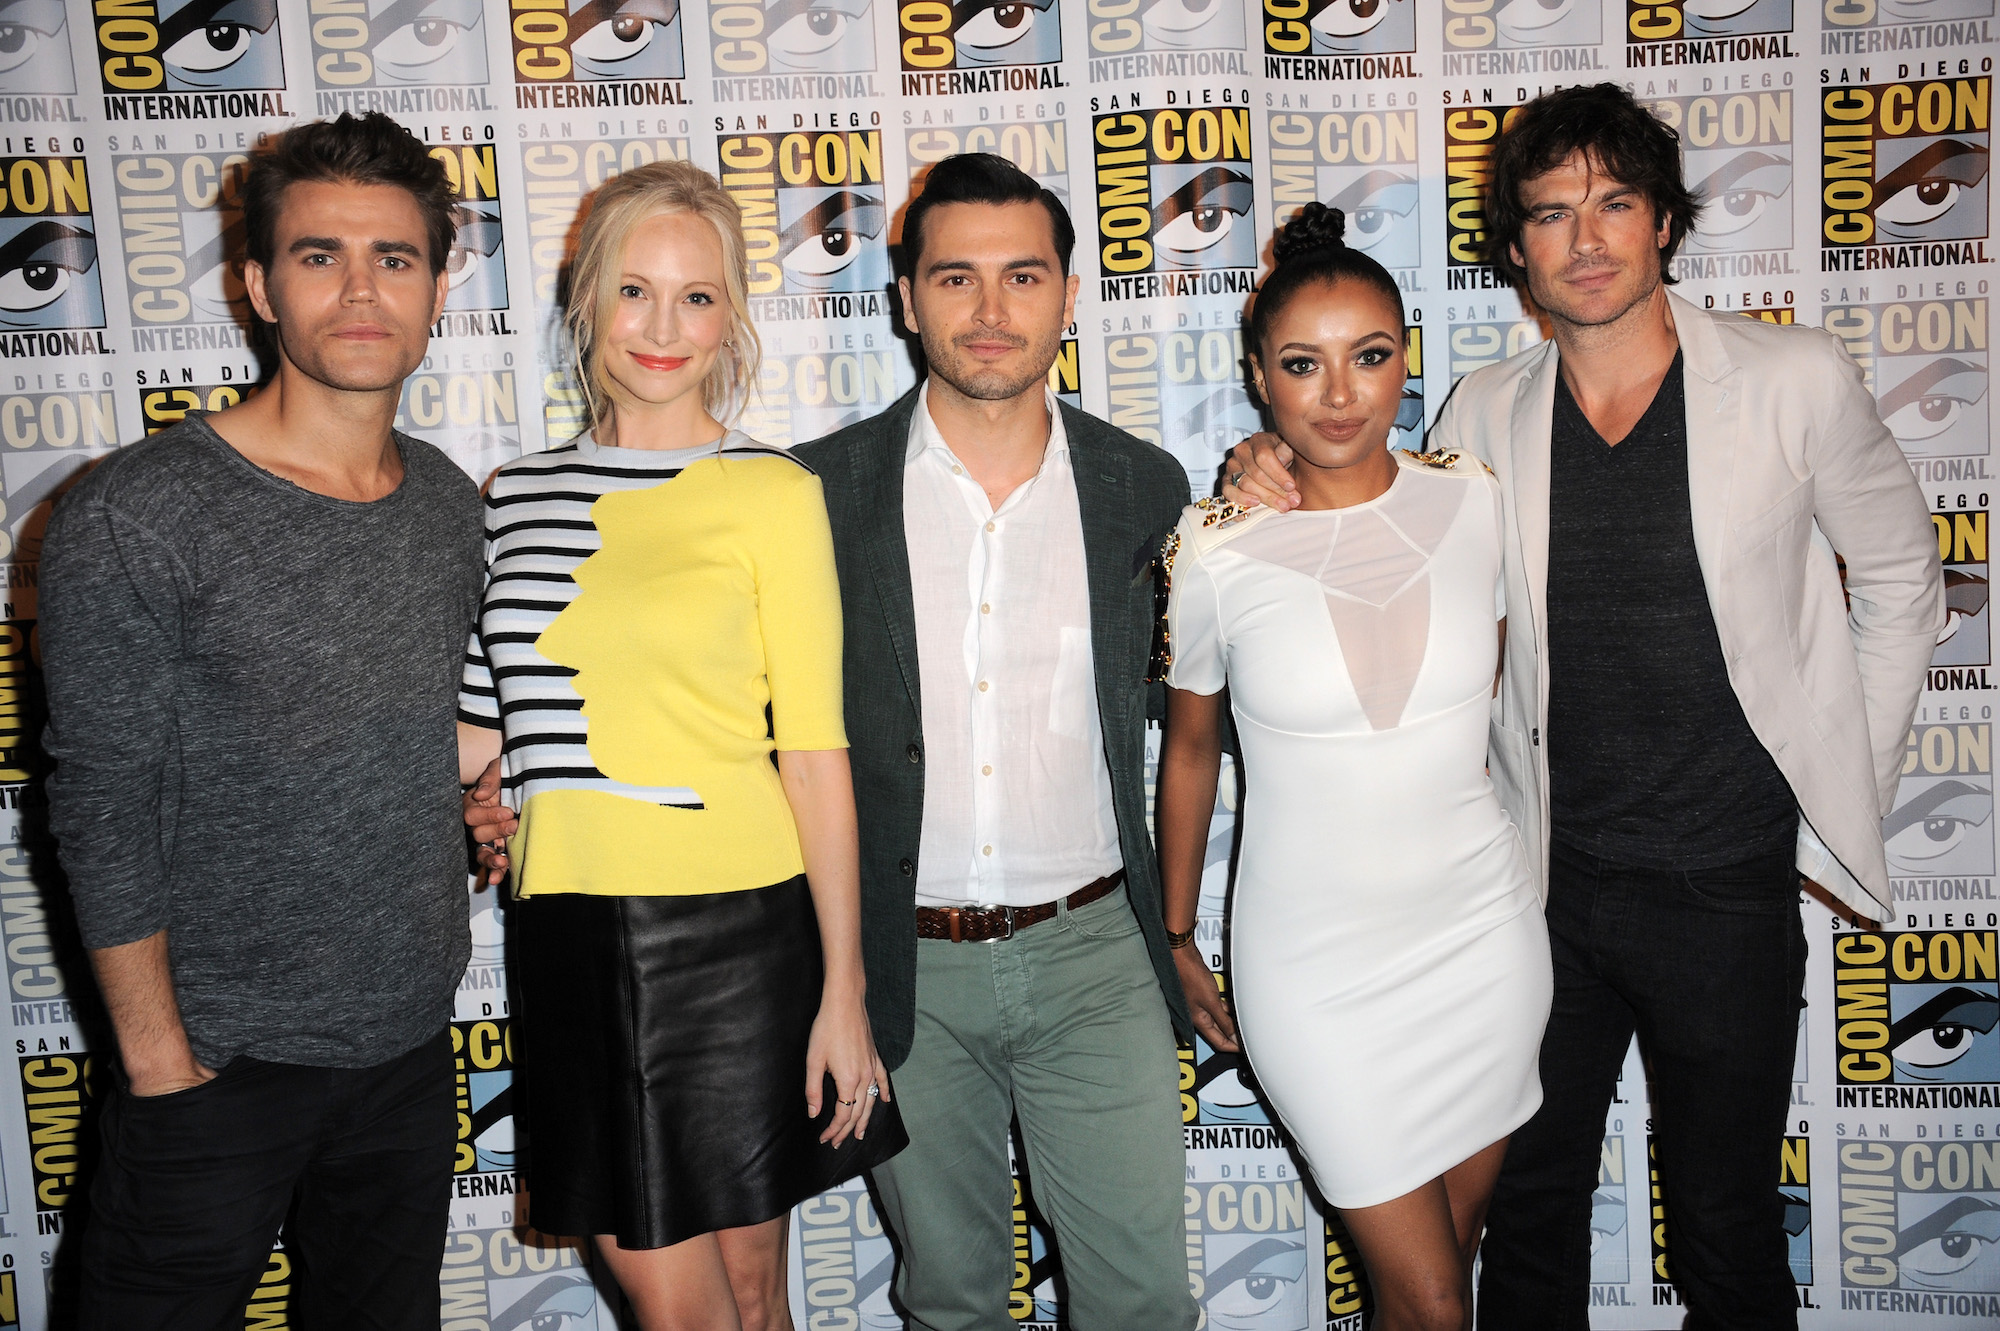 (L-R) Paul Wesley, Candice Accola, Michael Malarkey, Kat Graham and Ian Somerhalder smiling in front of a Comic Con backdrop